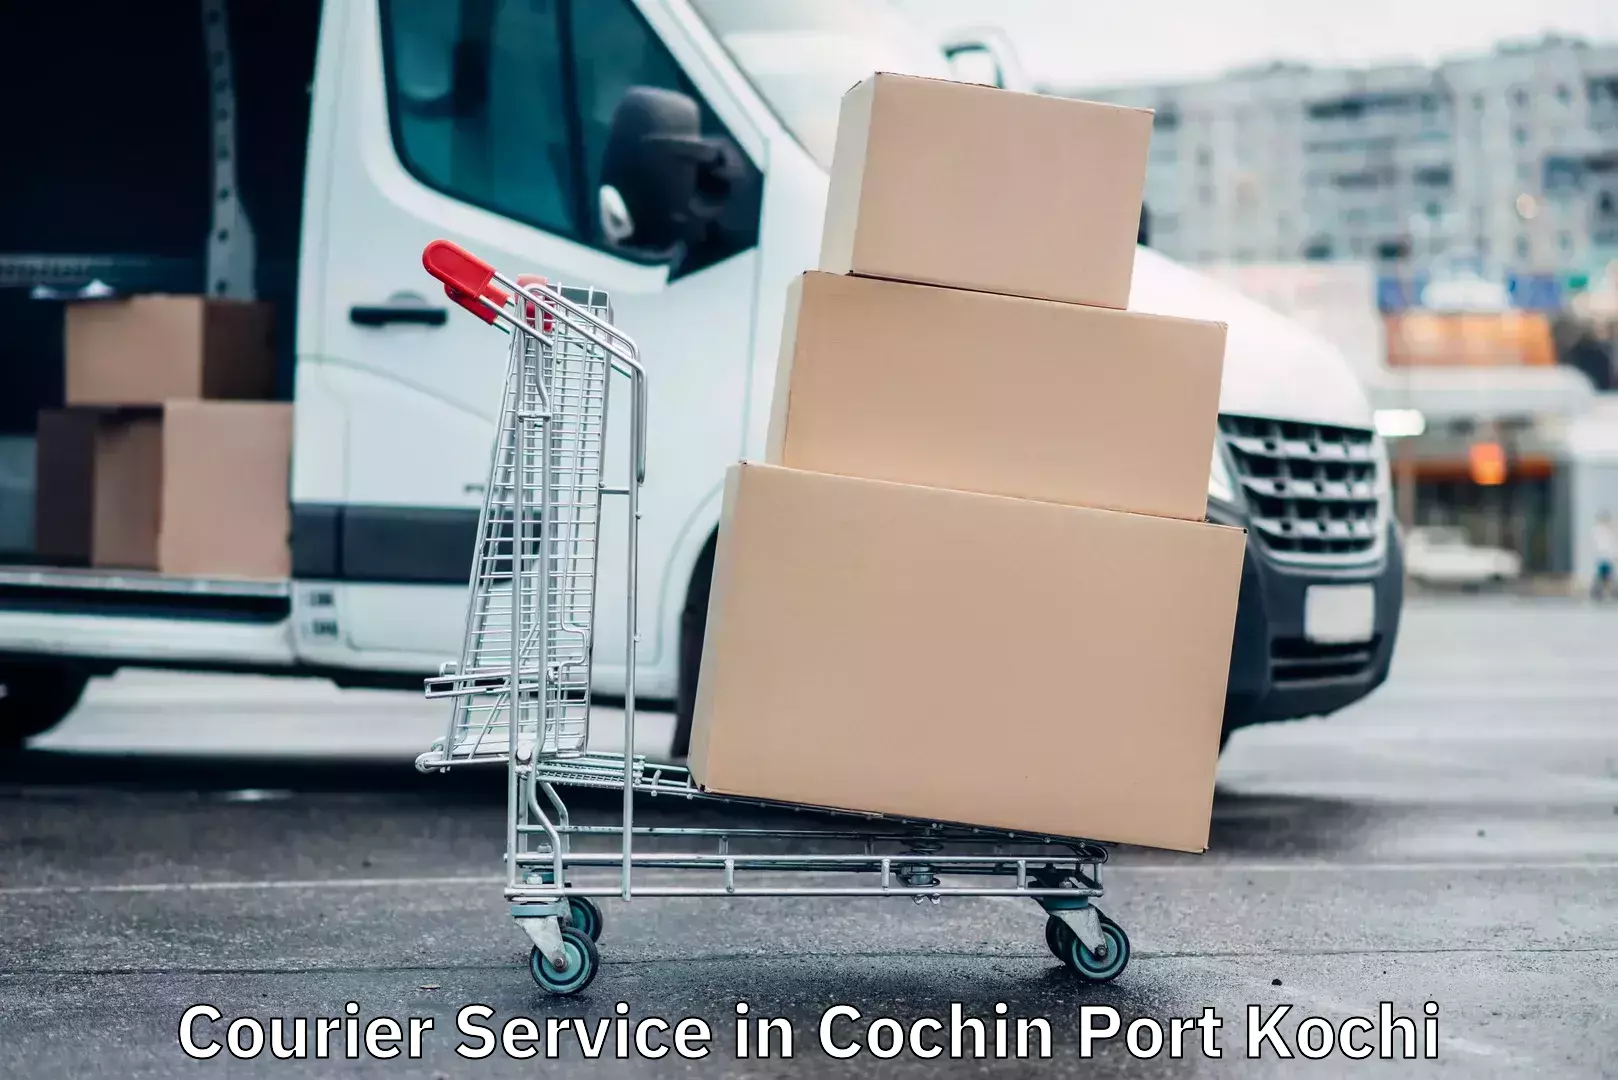 Innovative courier solutions in Cochin Port Kochi